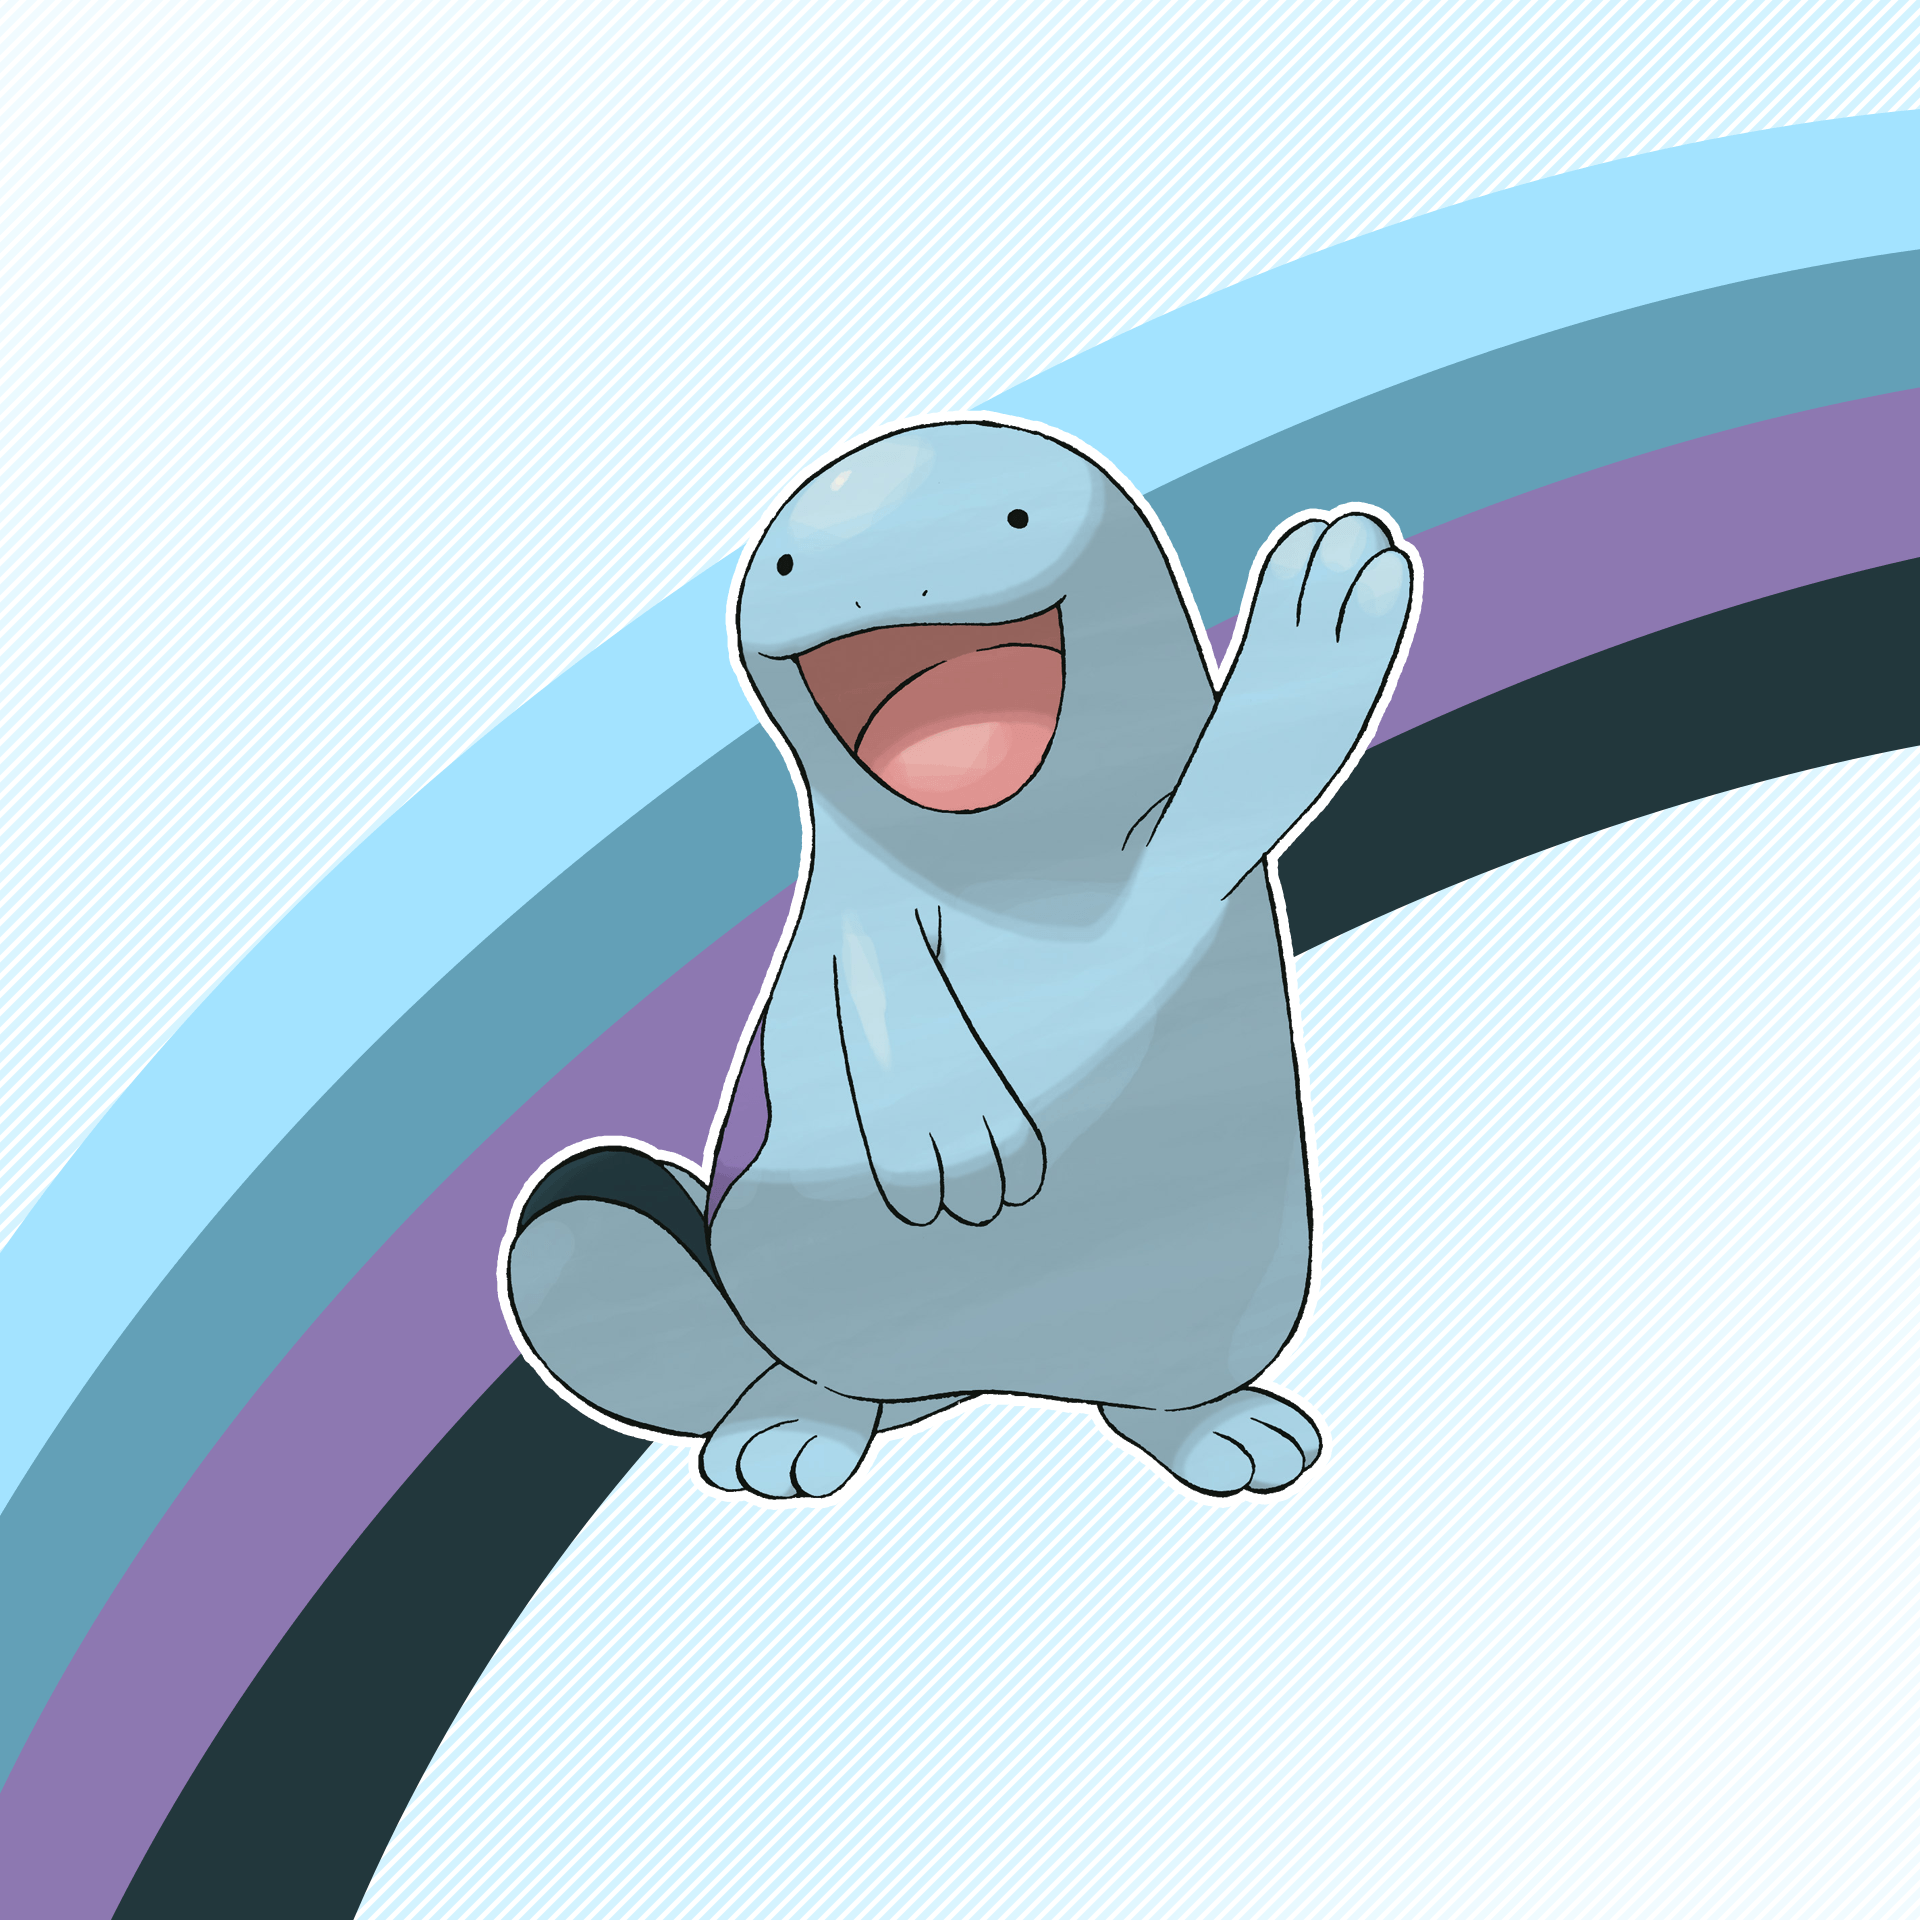 Made a few simple Pokemon wallpaper for Android. Open to requests